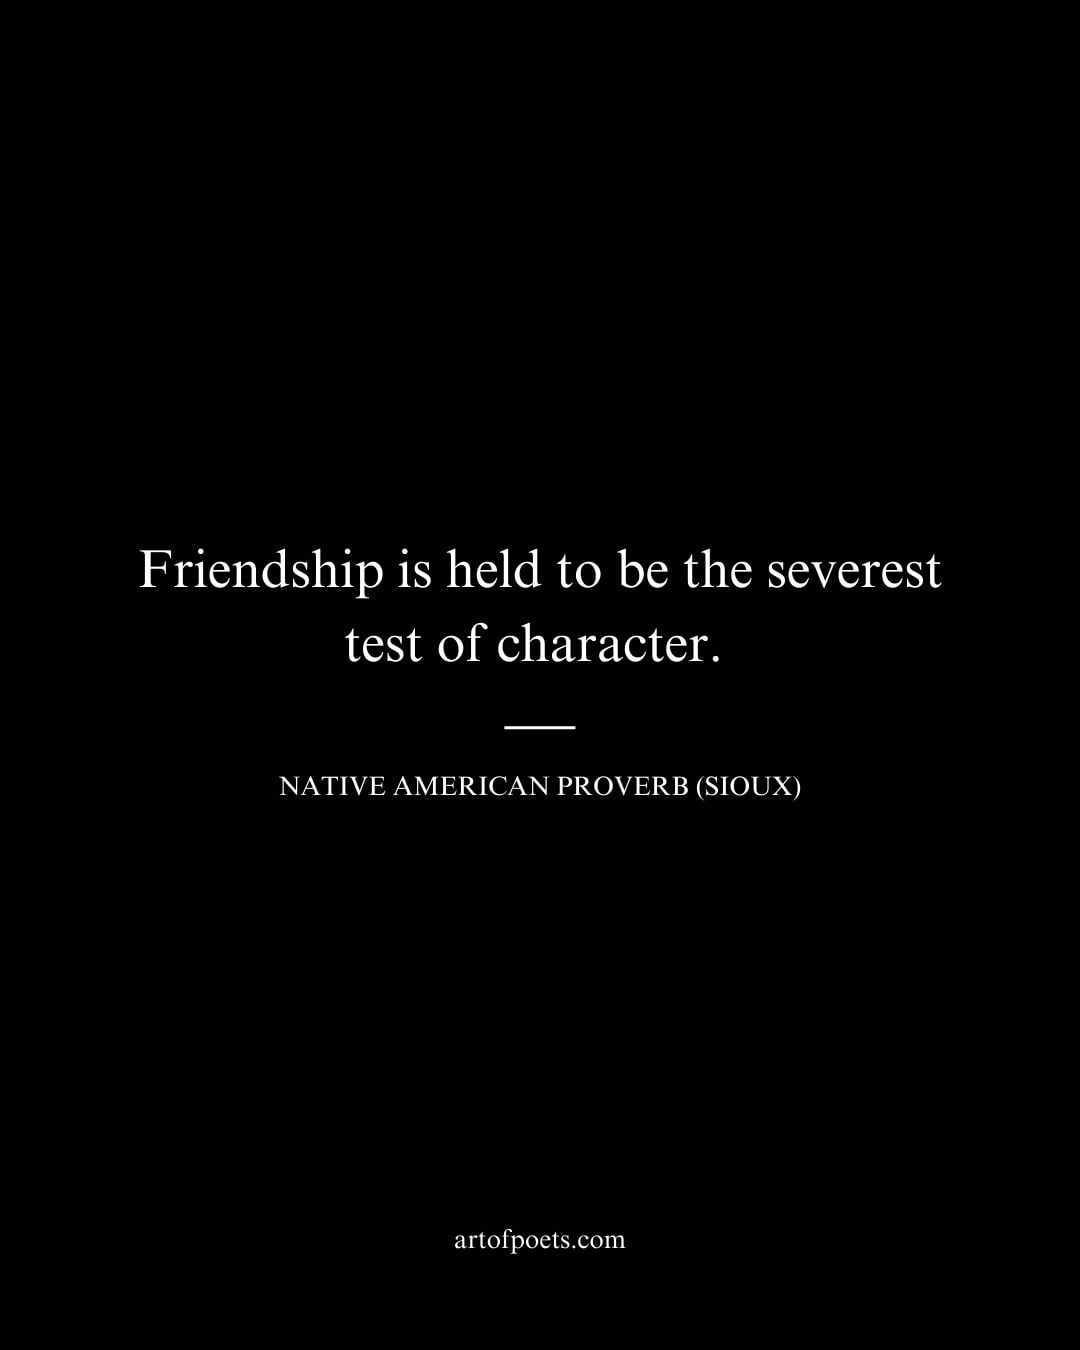 Friendship is held to be the severest test of character